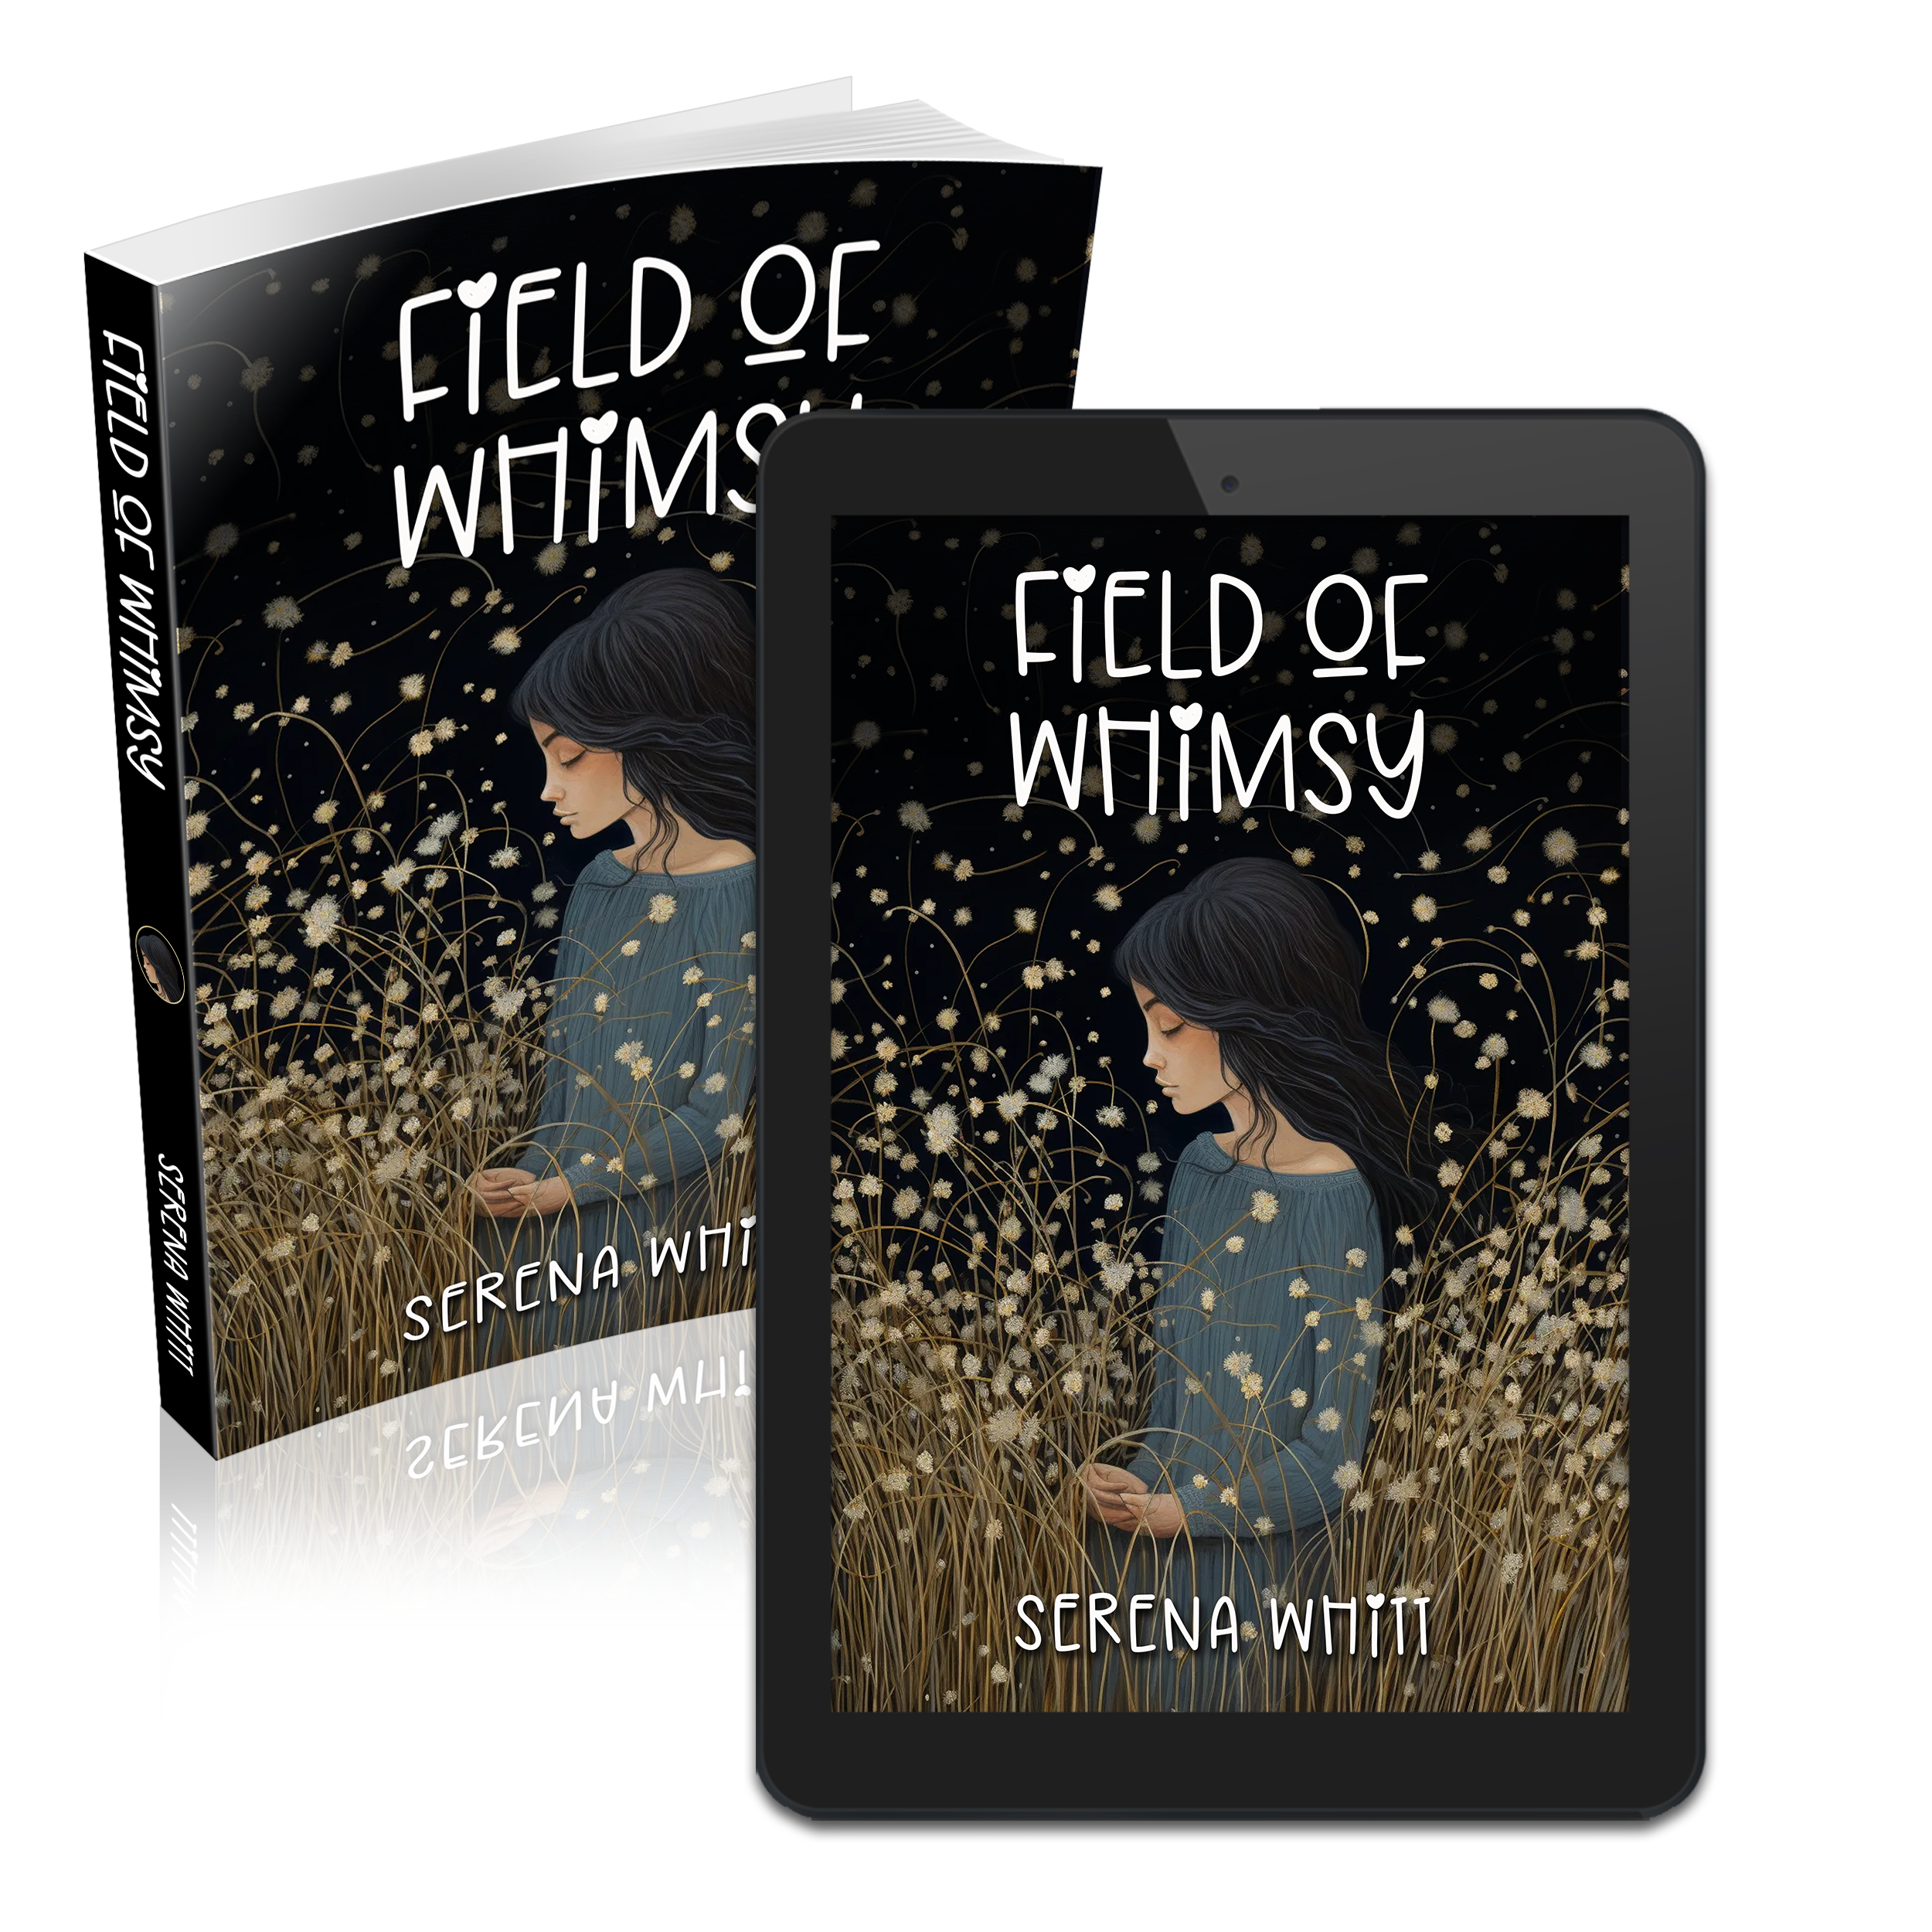 Field of whimsy premade cover